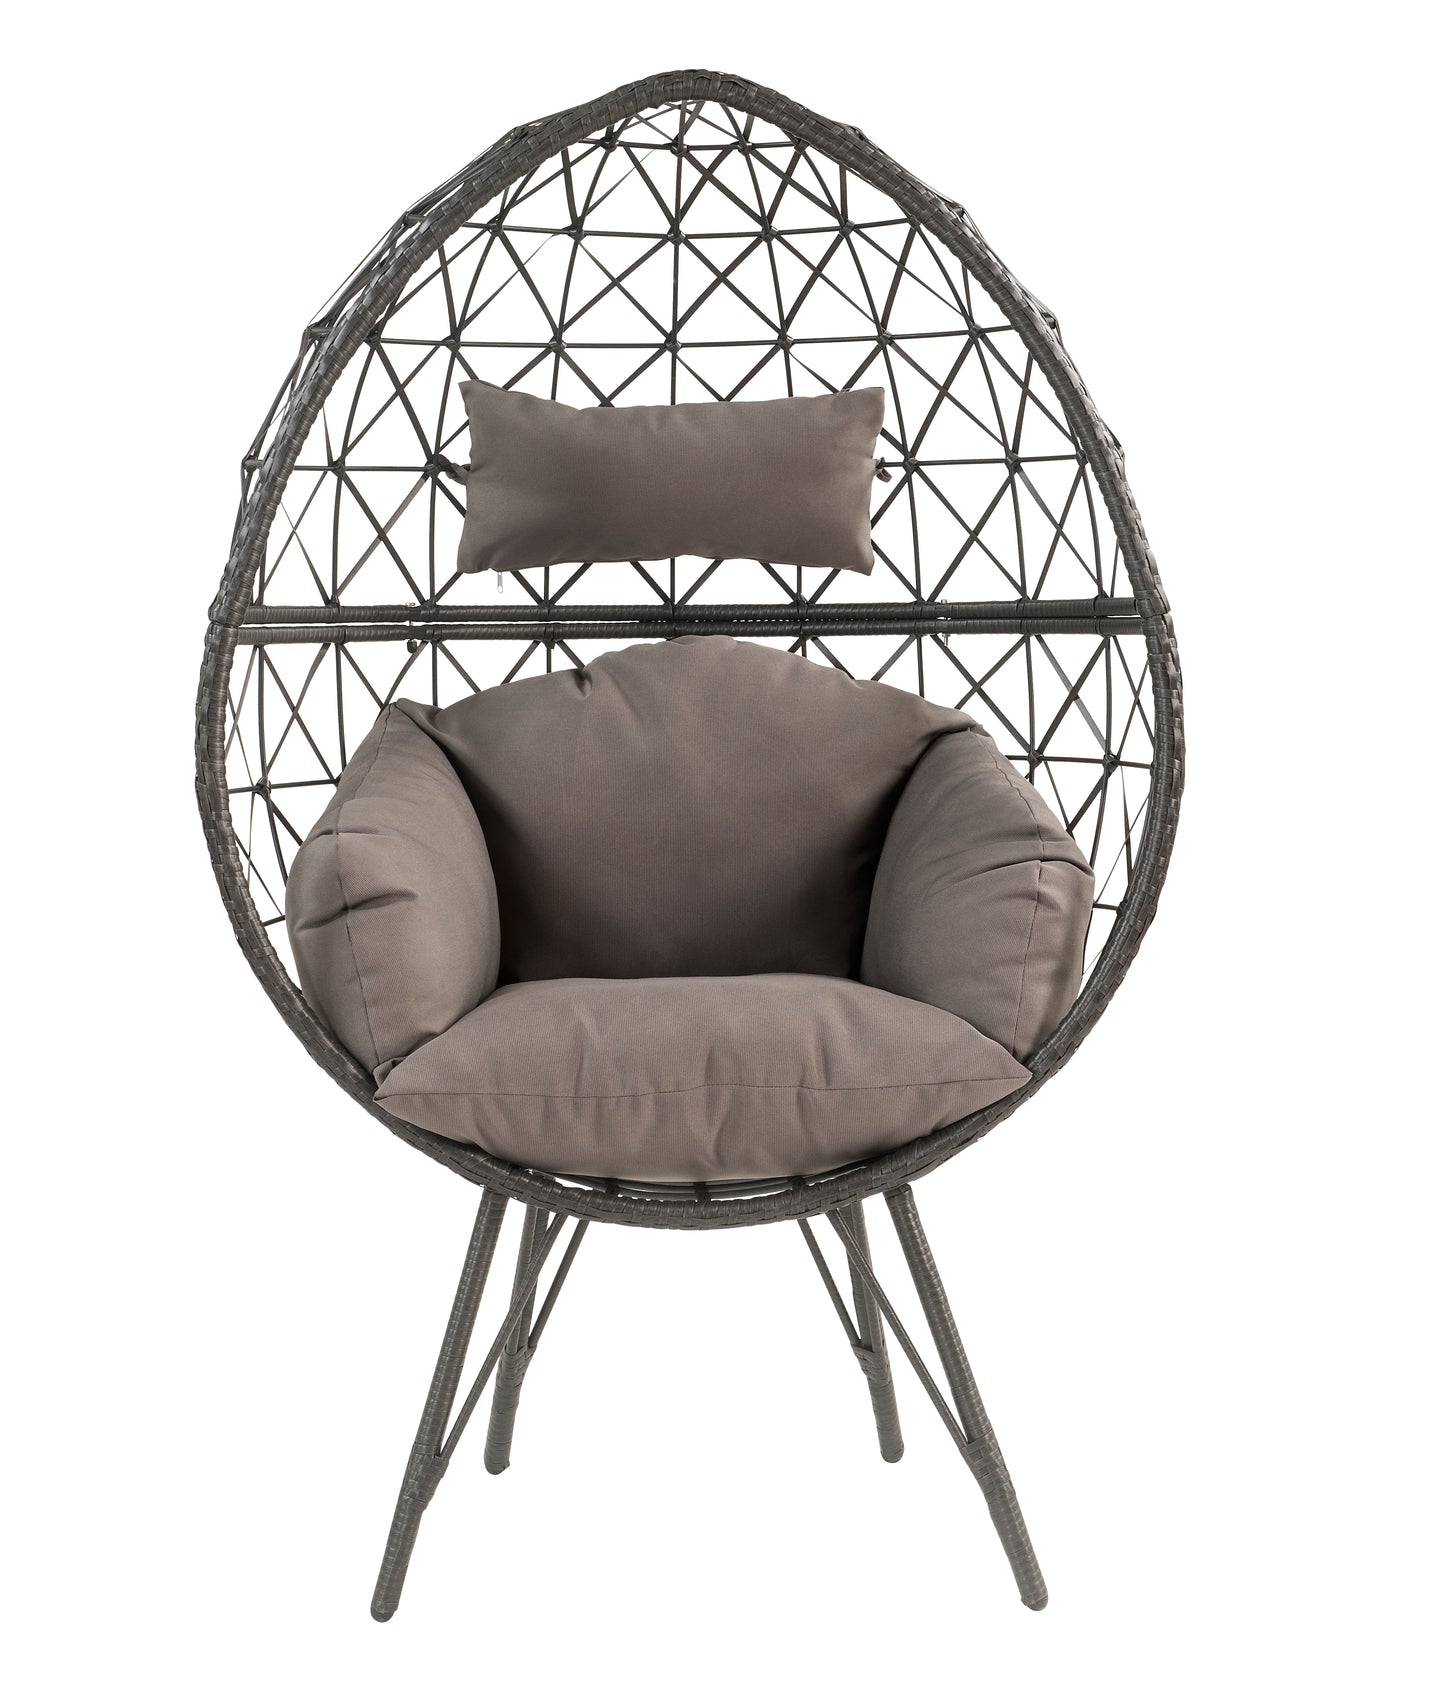 Aeven Lounge Chair